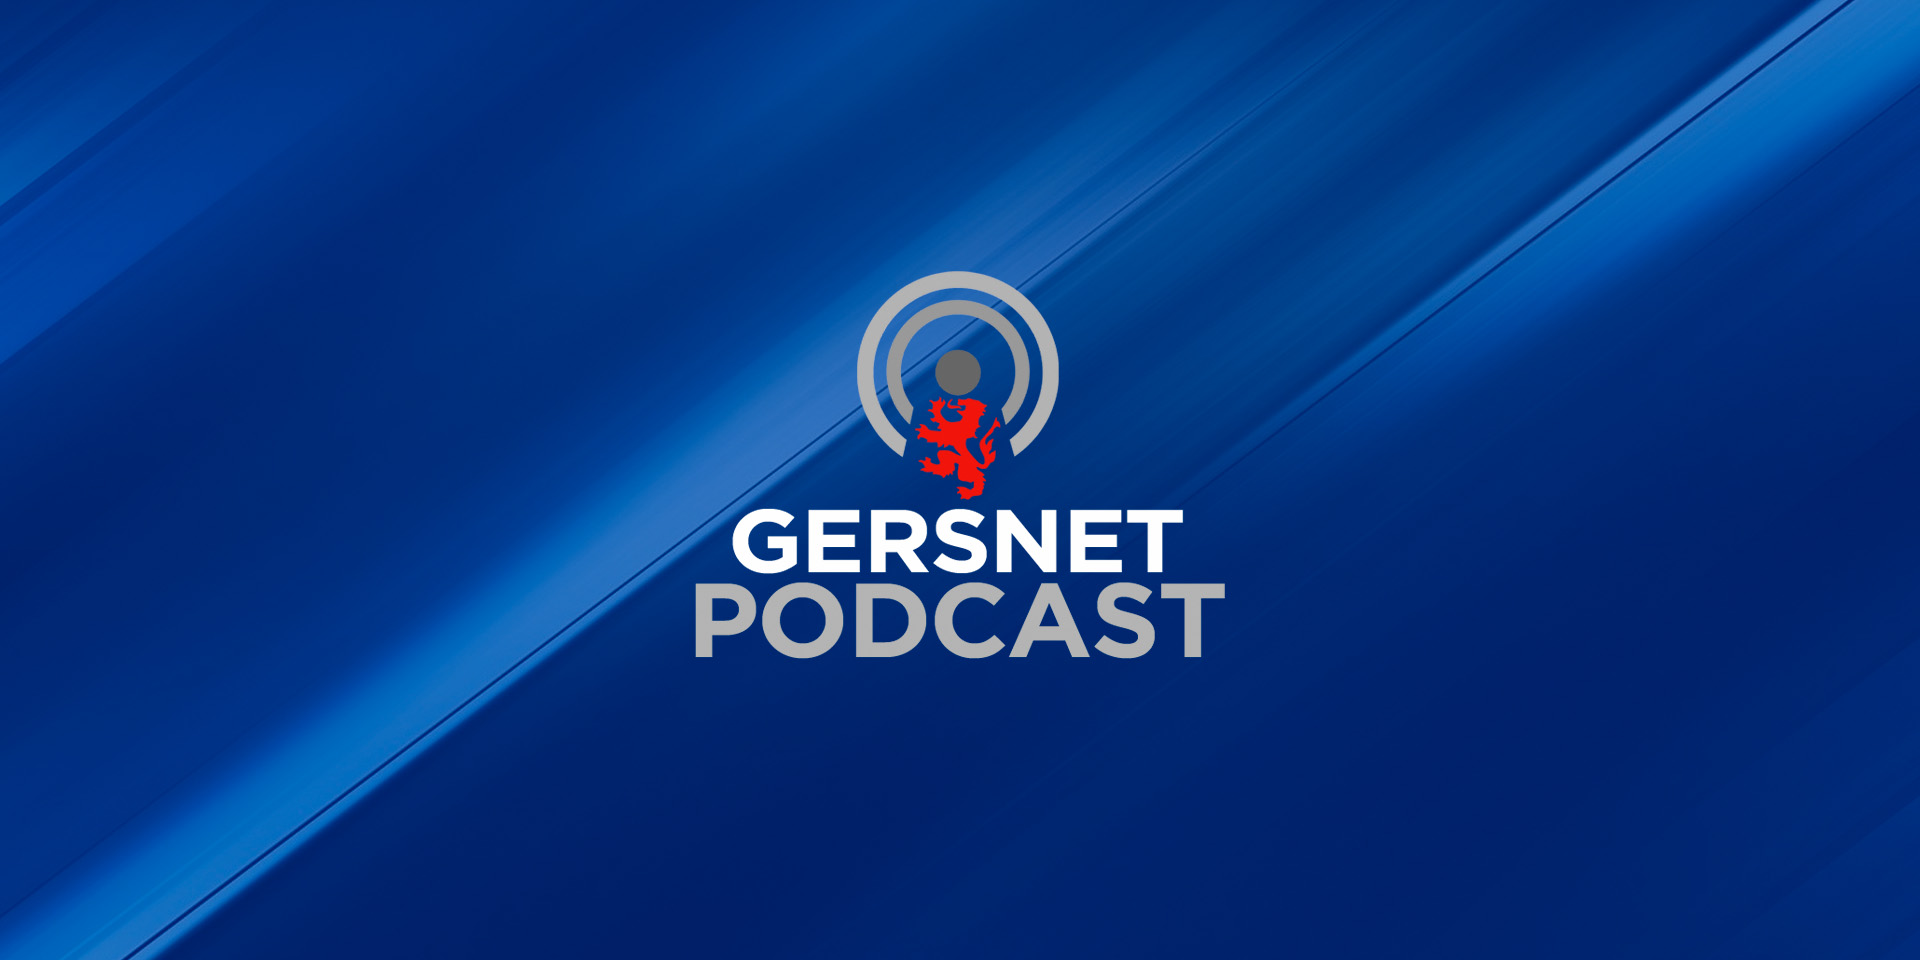 Gersnet Podcast 210 - Napoli Preview